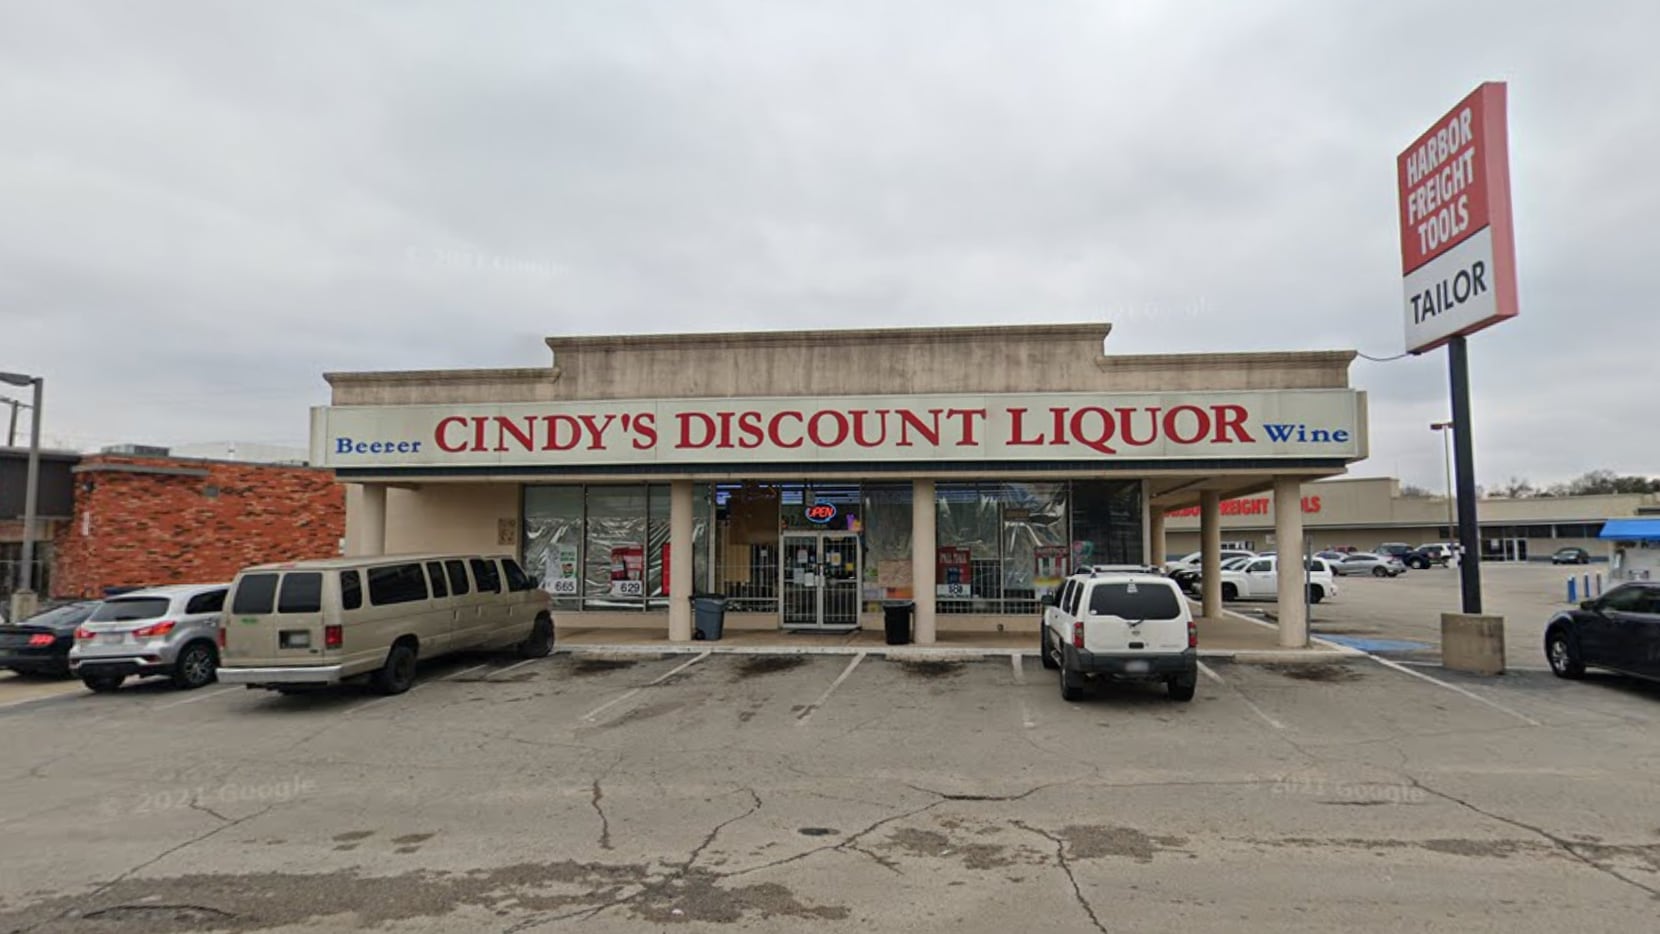 Dallas police were called to Cindy’s Discount Liquor in the 6500 block of Skillman Street.